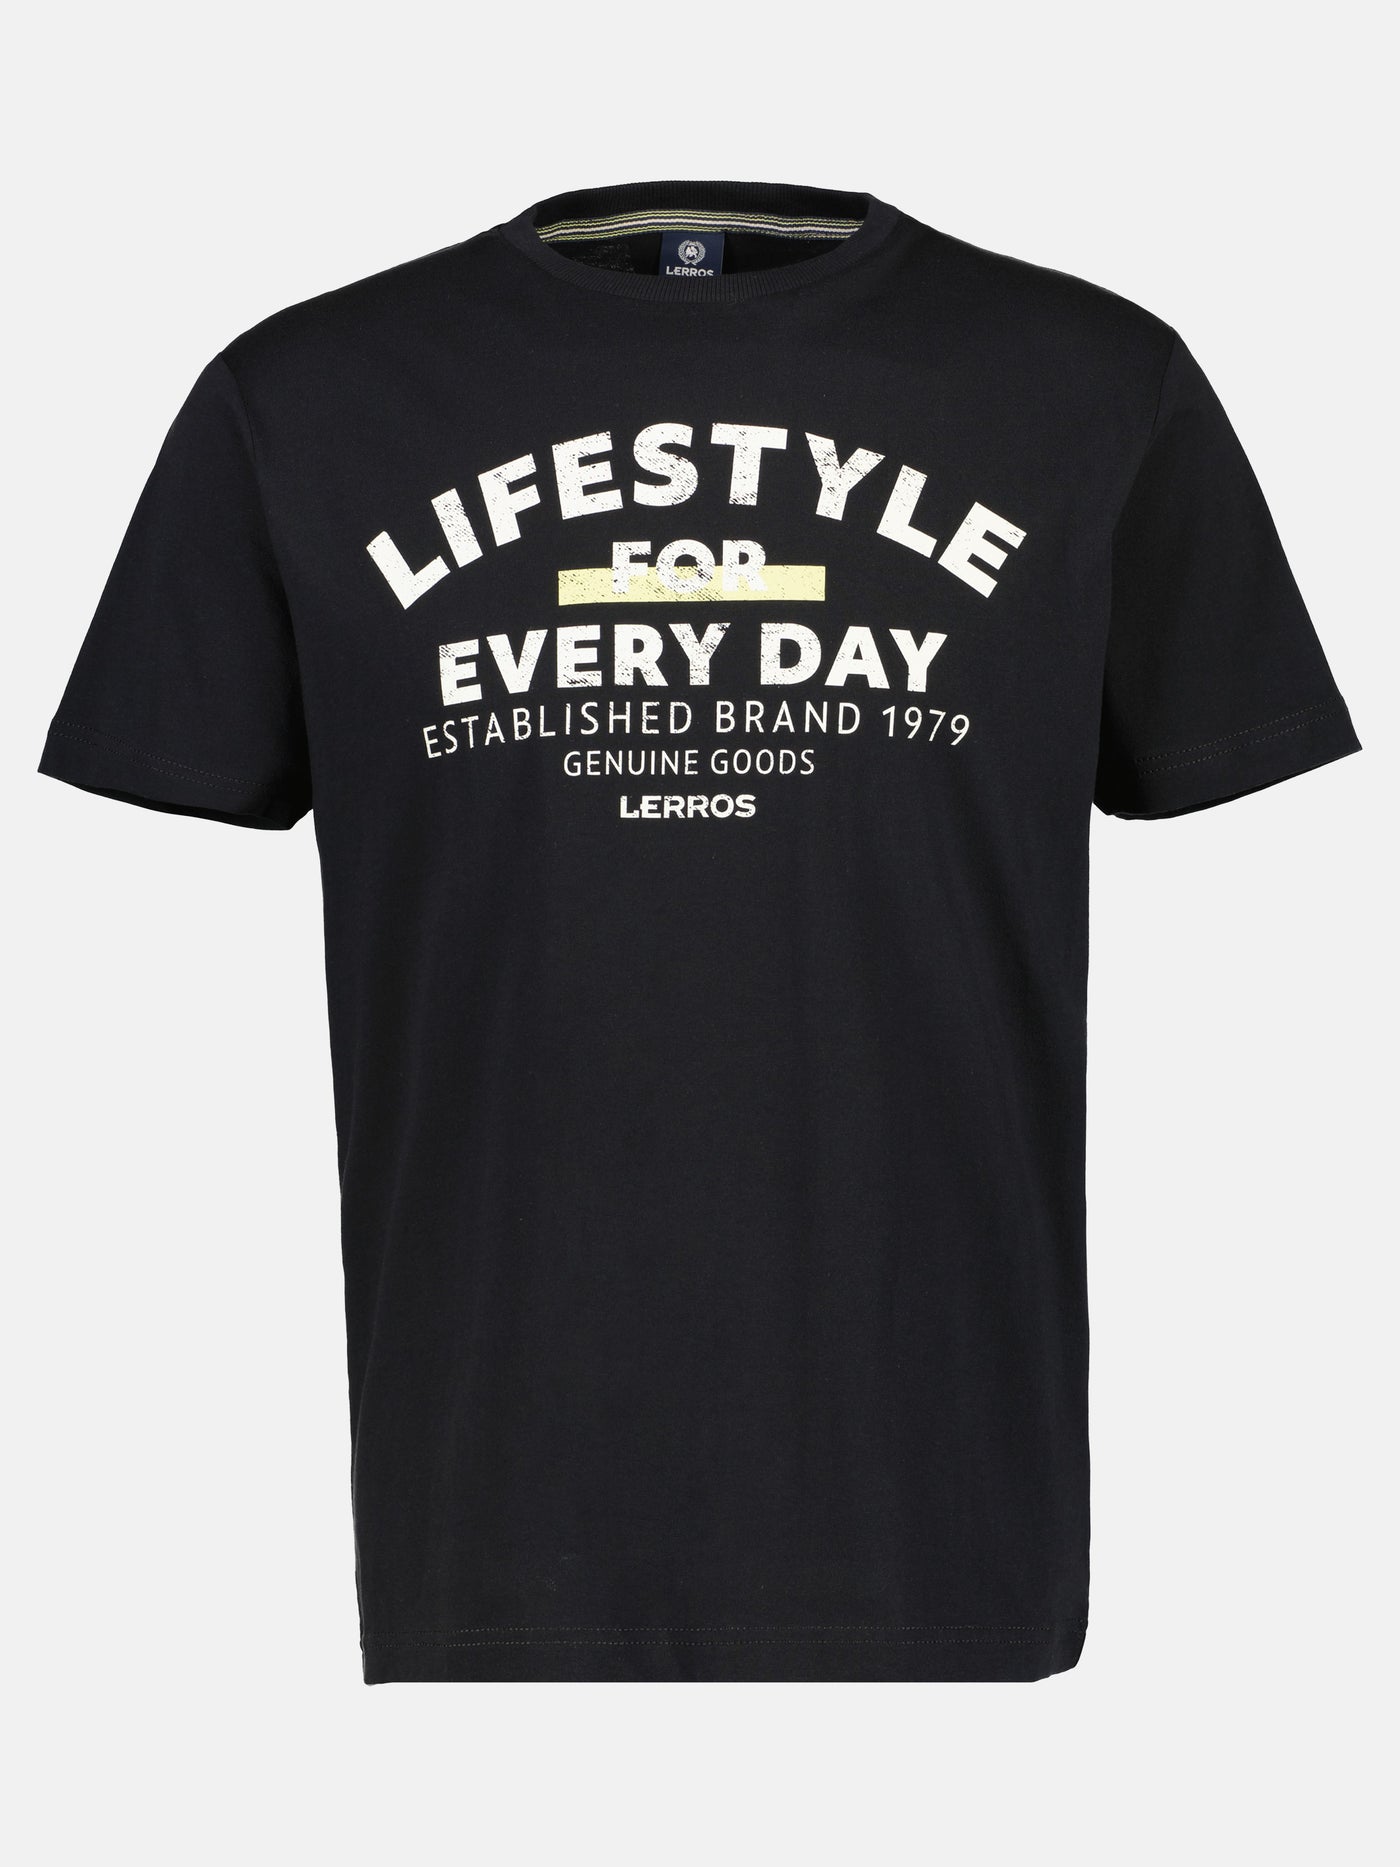 every *Lifestyle T-Shirt – LERROS for day* SHOP